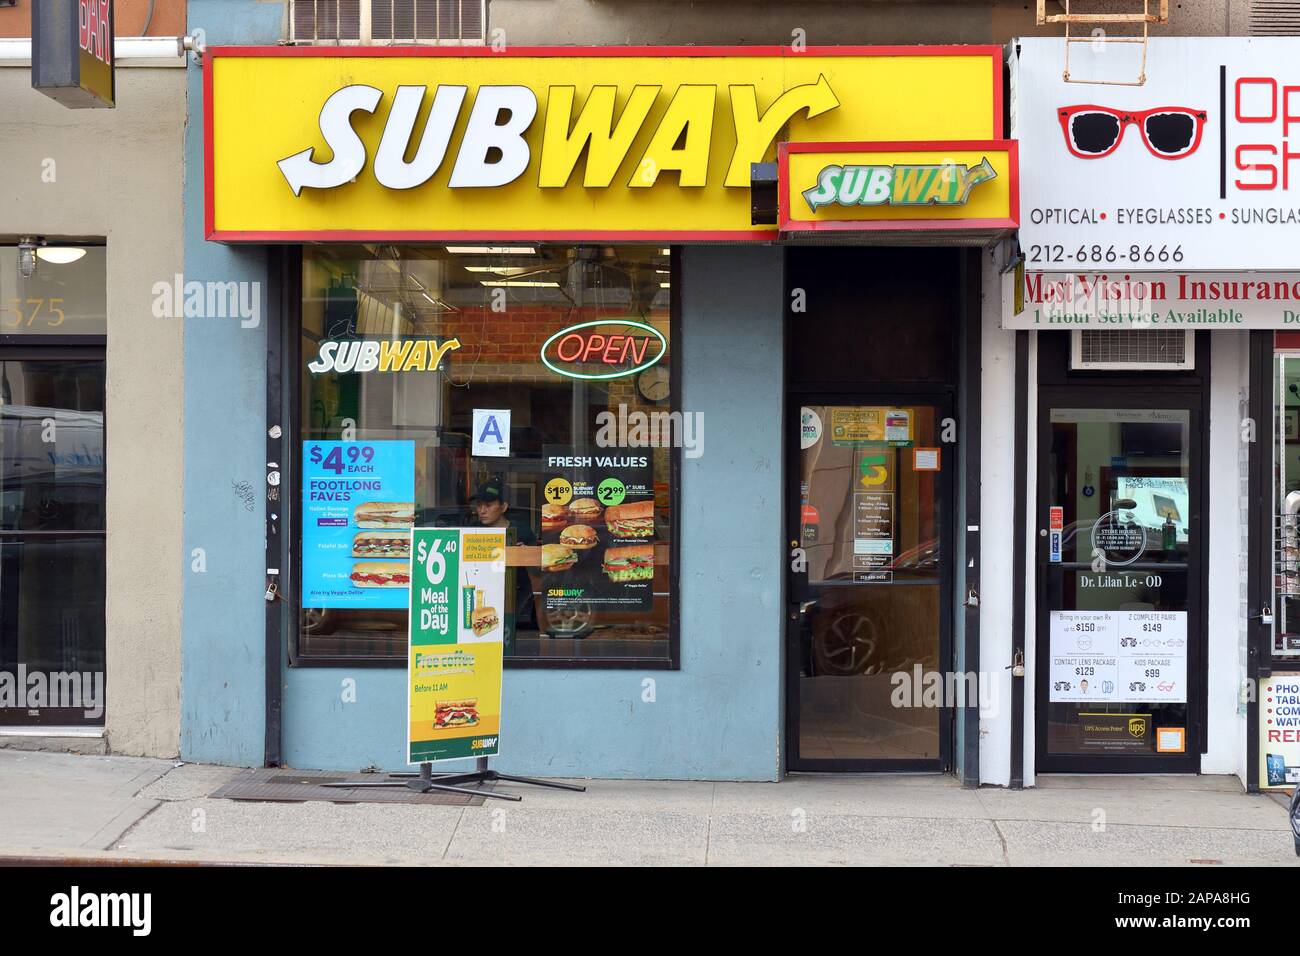 Subway Restaurant, 577 2nd Ave, New York, NYC storefront photo of a sandwich shop chain restaurant in the Kips Bay neighborhood of Manhattan. Stock Photo